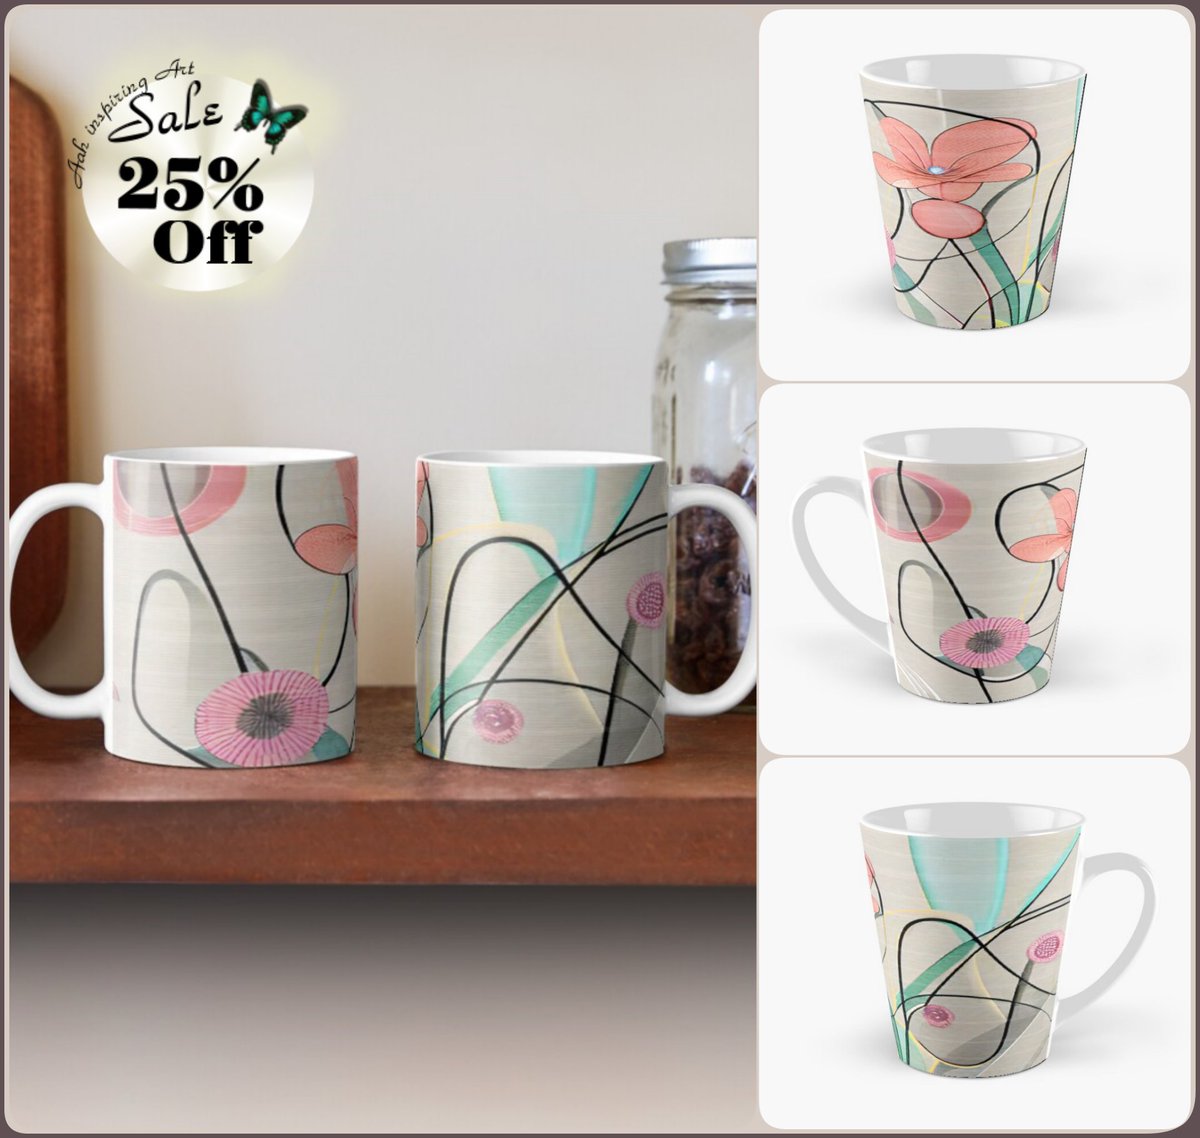 *SALE 25% Off Everything*
Melody Coffee Mug~by Art Falaxy~
~Be Artful~
#accents #homedecor #art #artfalaxy #coasters #mugs #puzzles #acrylicblocks #aprons #redbubble #trendy #modern #gifts #FindYourThing #teal #orange #beige #pink

redbubble.com/i/mug/Melody-b…